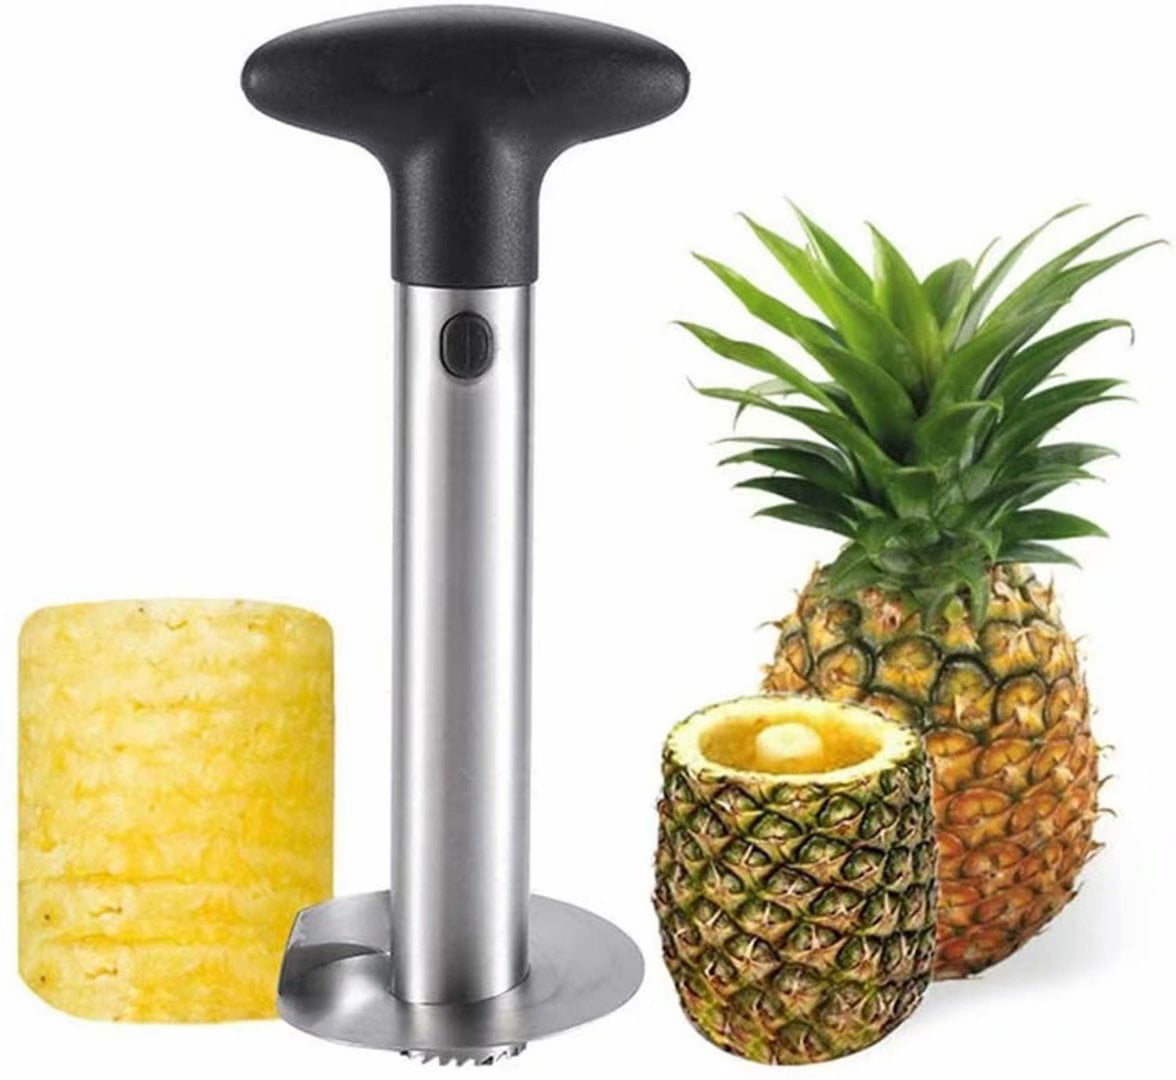 New Pineapple Corer Upgraded Reinforced Thicker Blade Newness Premium Corer 